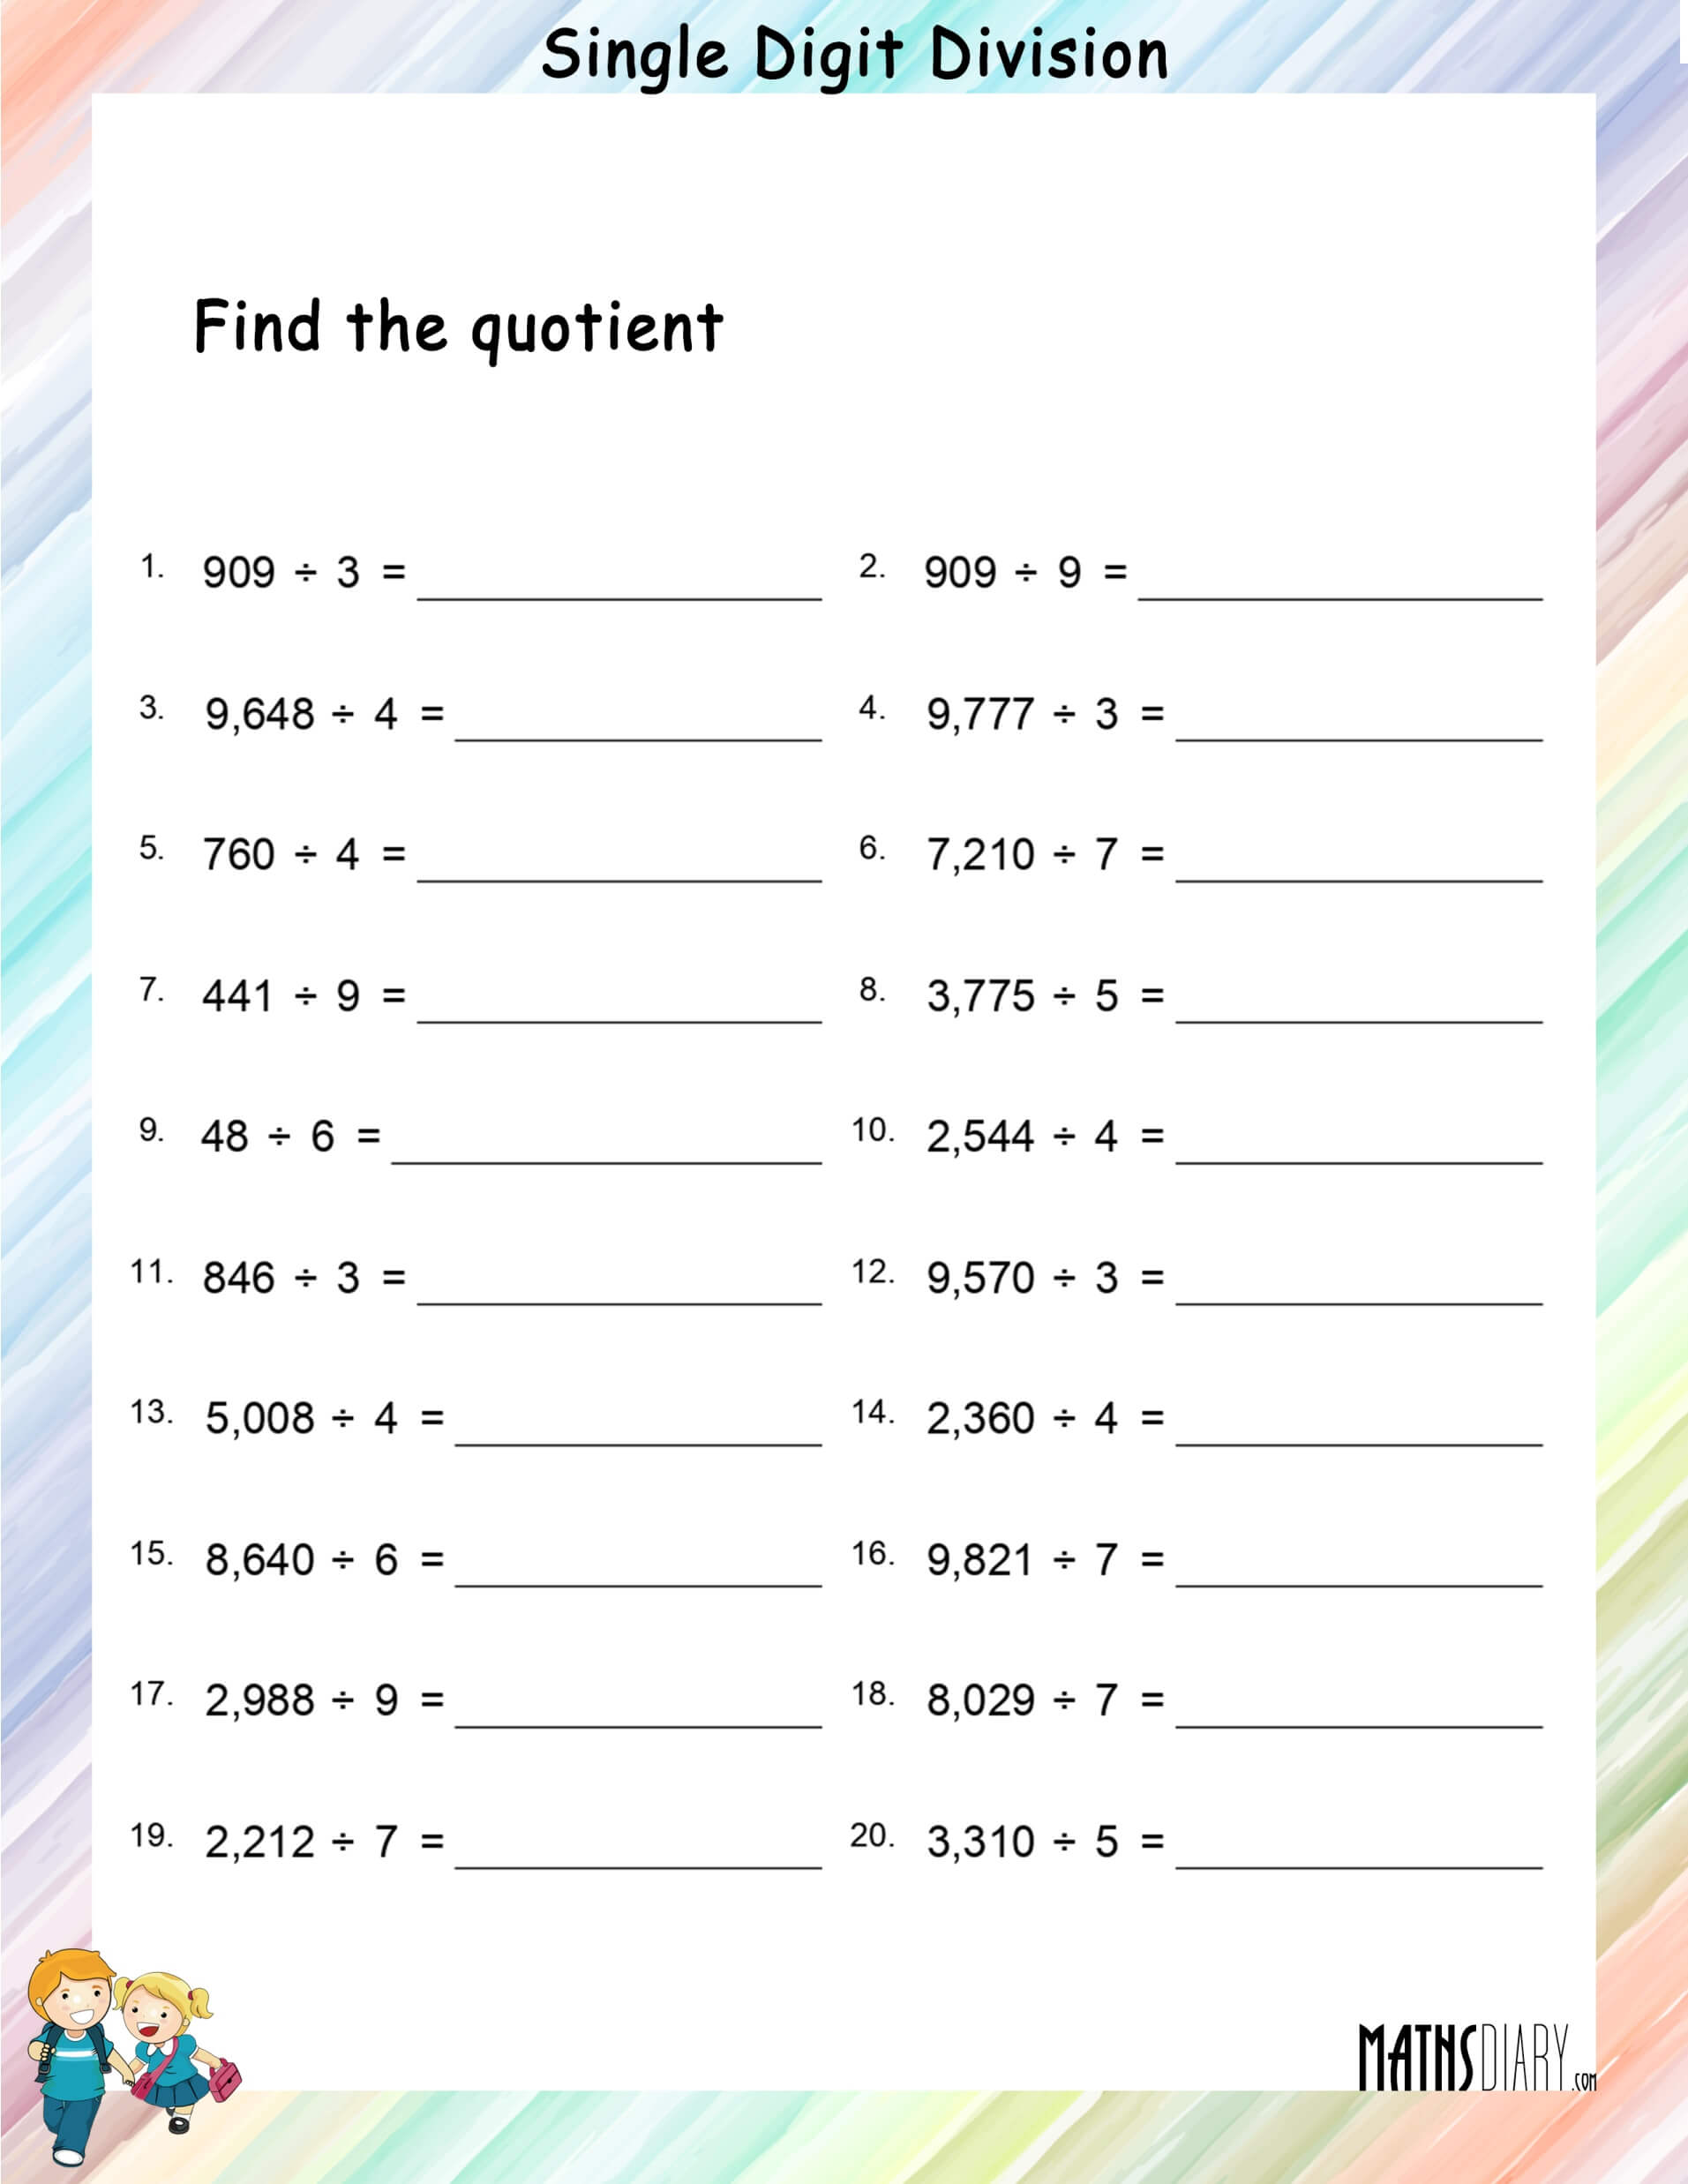 Dividing By One Digit Numbers Without Remainders Worksheets